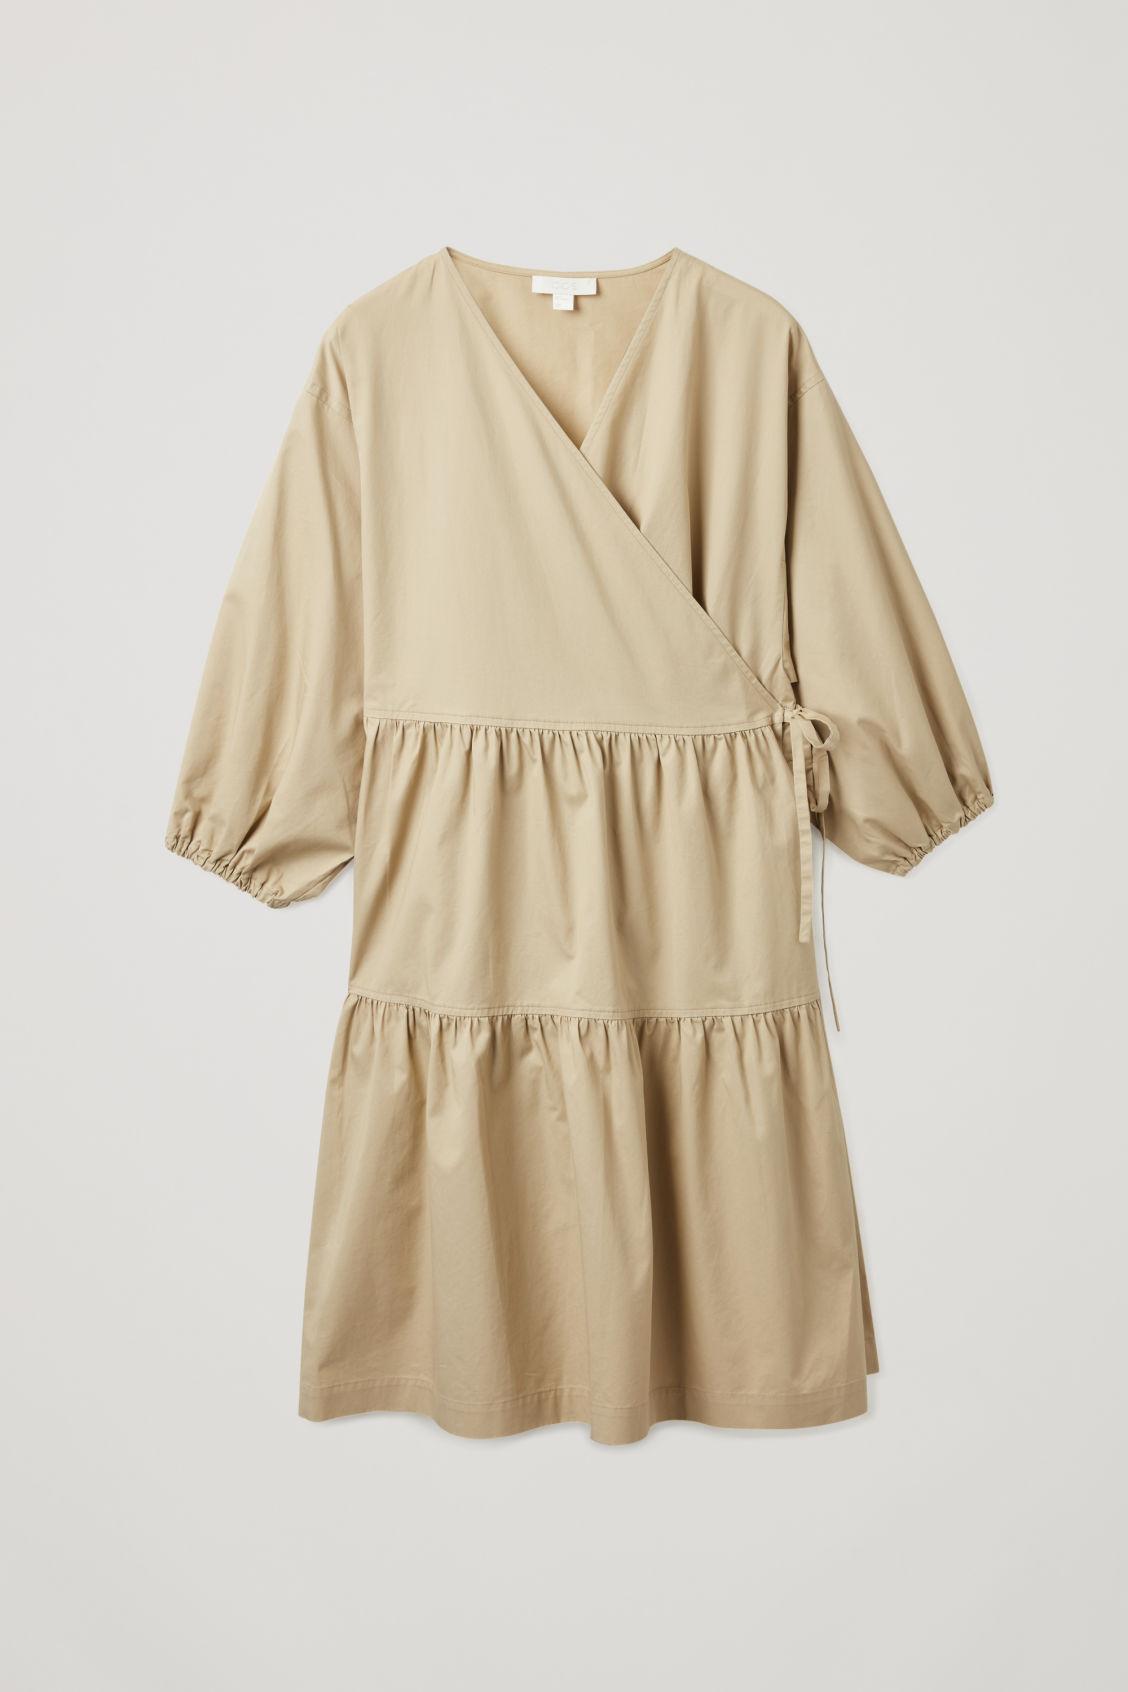 COS Gathered A-line Wrap Dress in Natural | Lyst UK